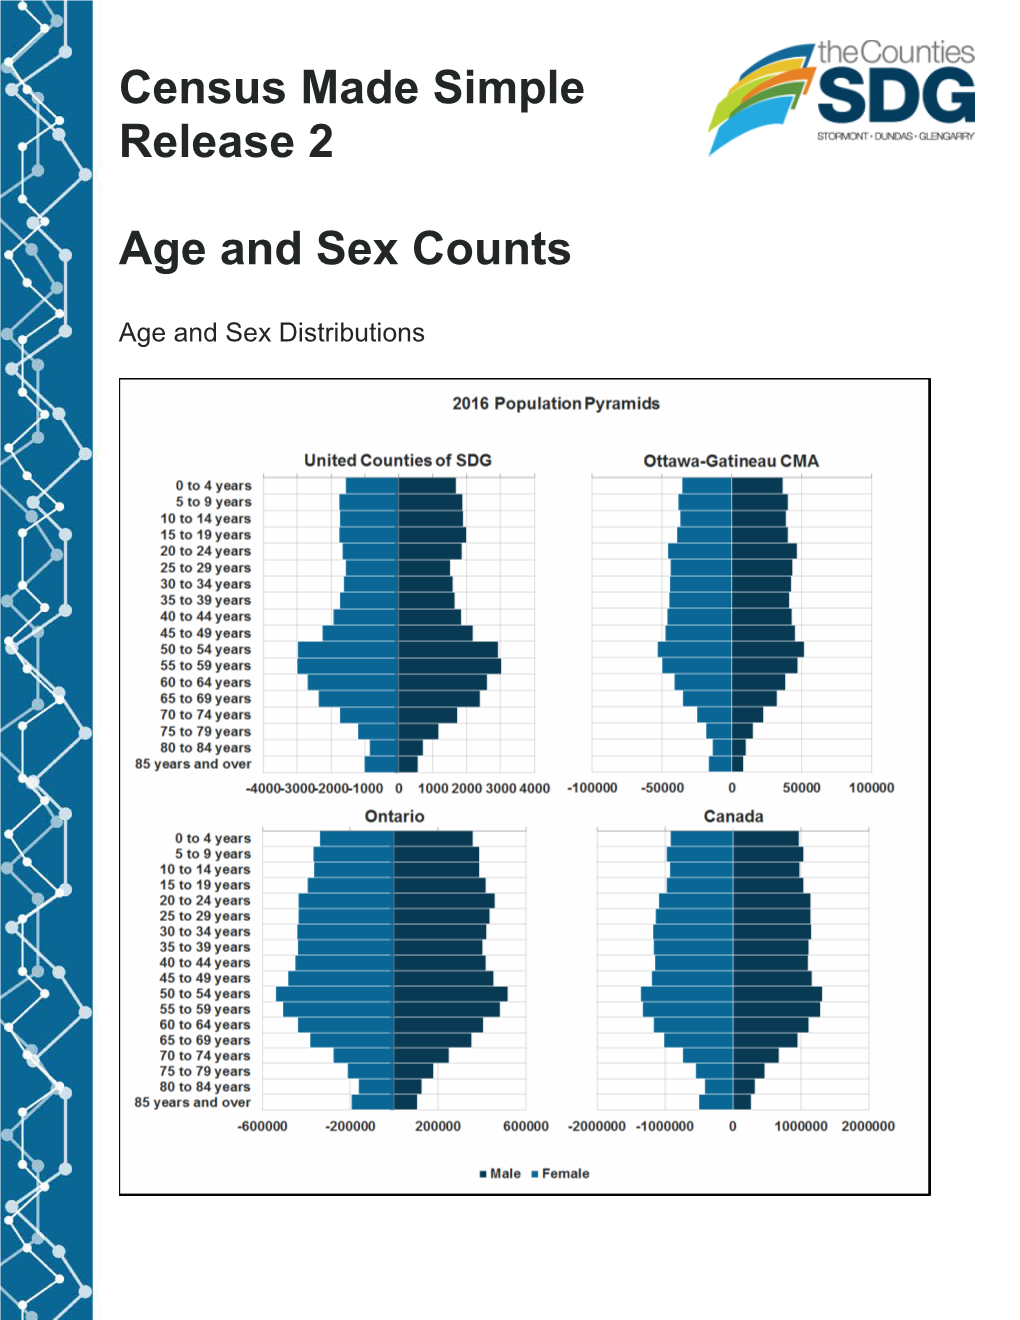 Census Made Simple Release 2 Age and Sex Counts